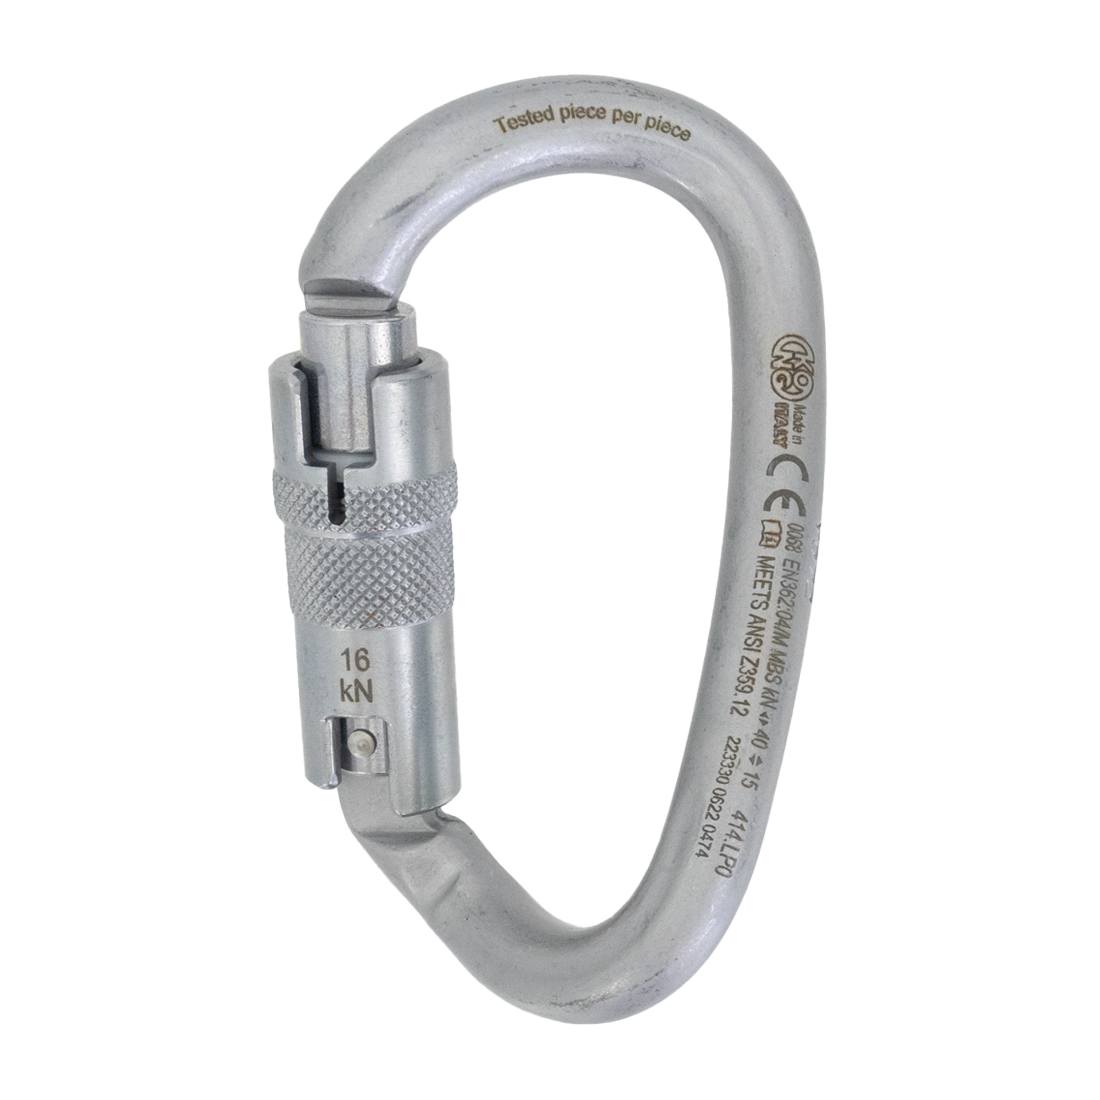 KONG DNA Carabiner - Ovalone Autoblock ANSI Back View